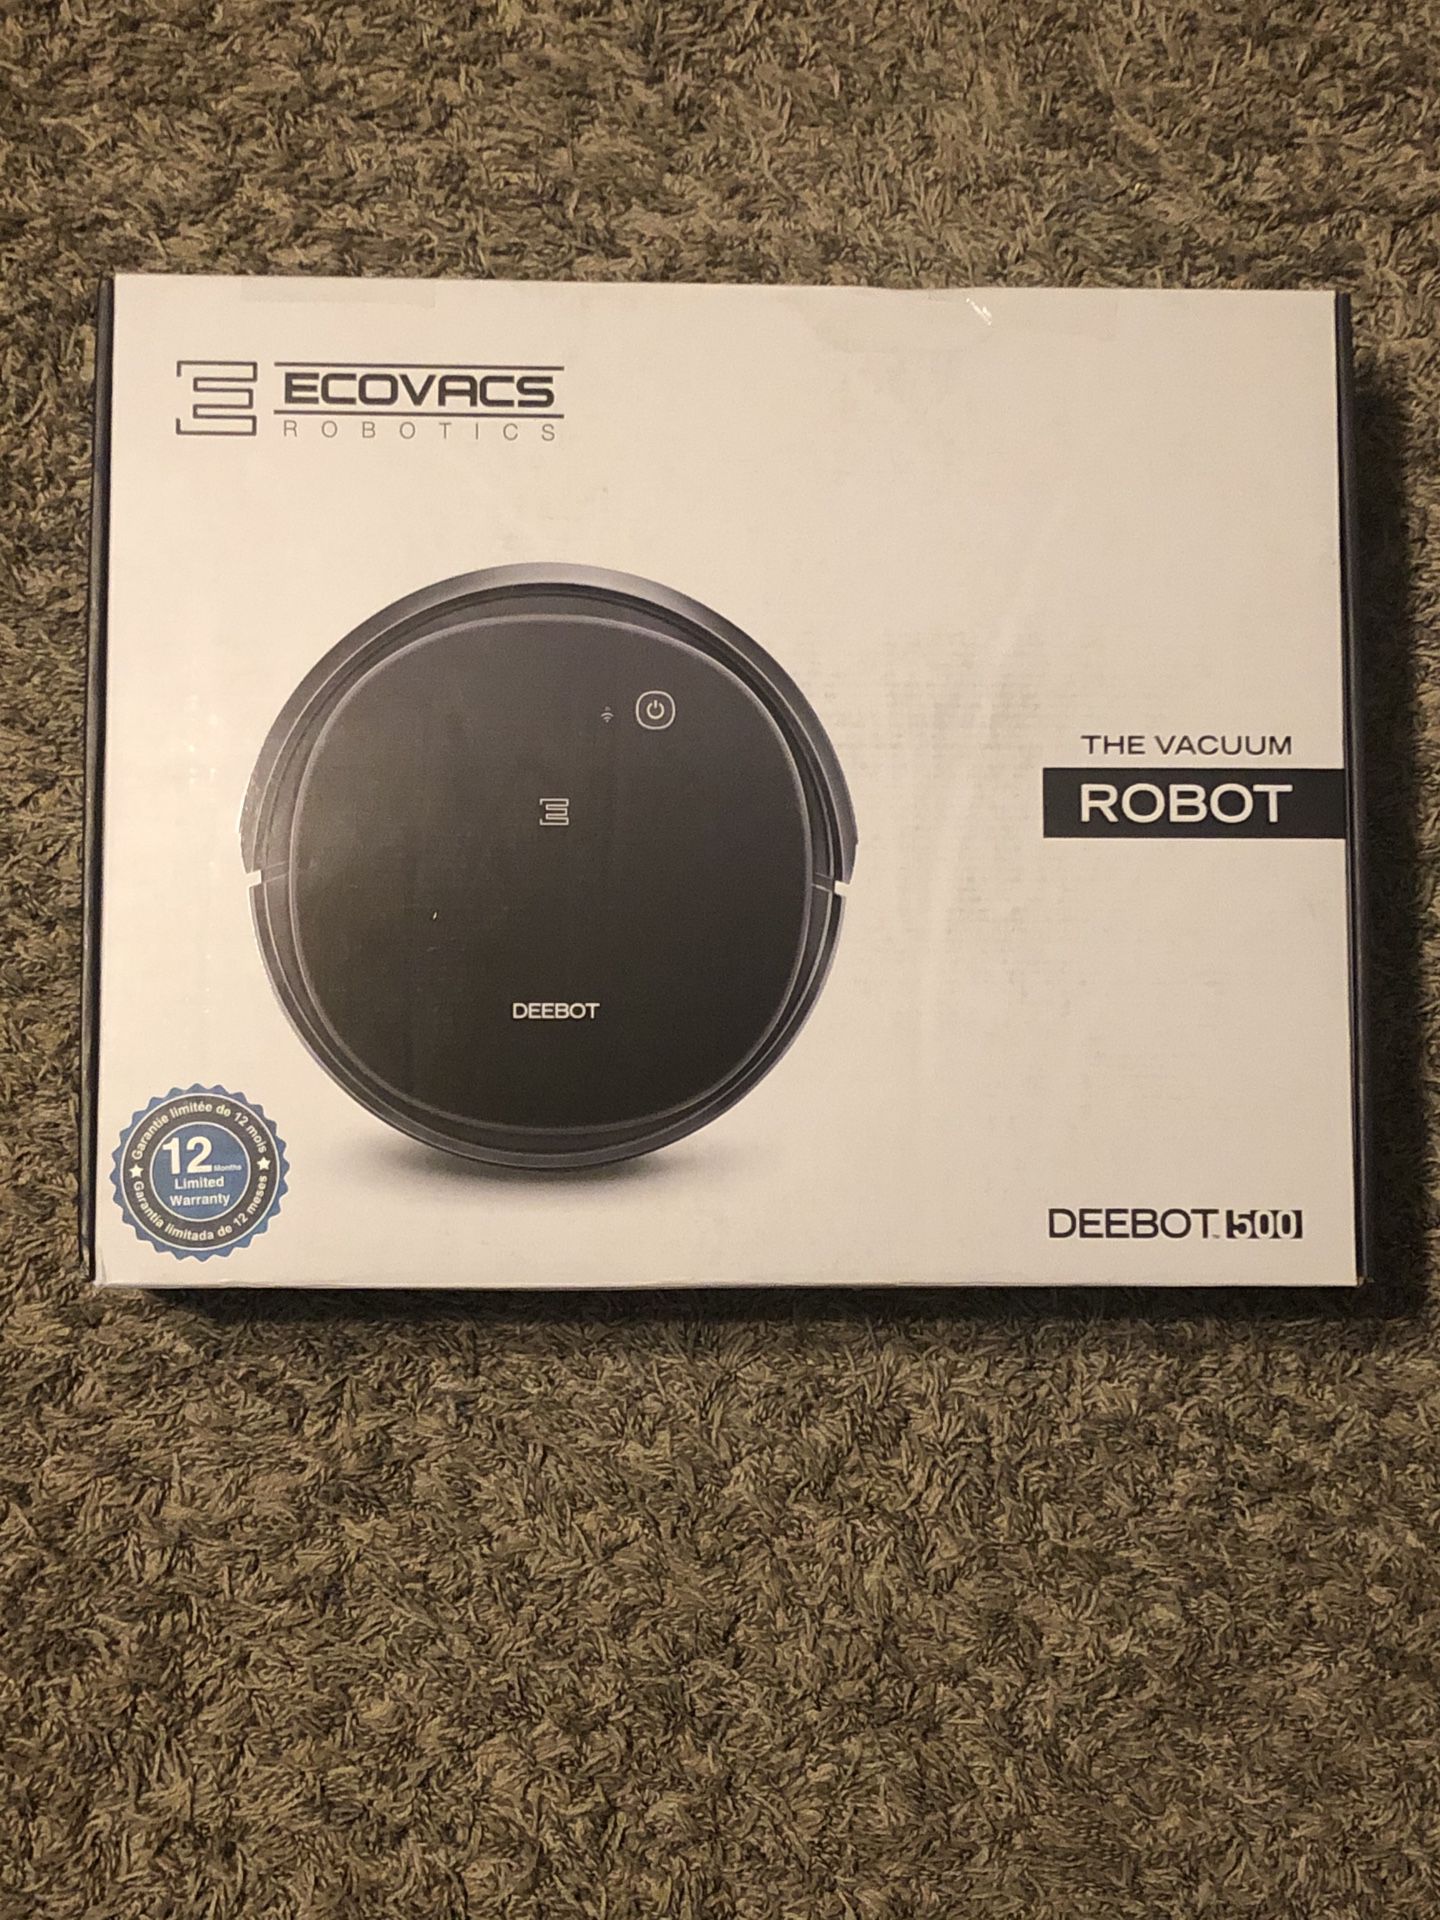 Eecovacs Robotics Robot Vacuum, Debot 500, Charging Station, Power Cord, Remote, Cleaning Brush